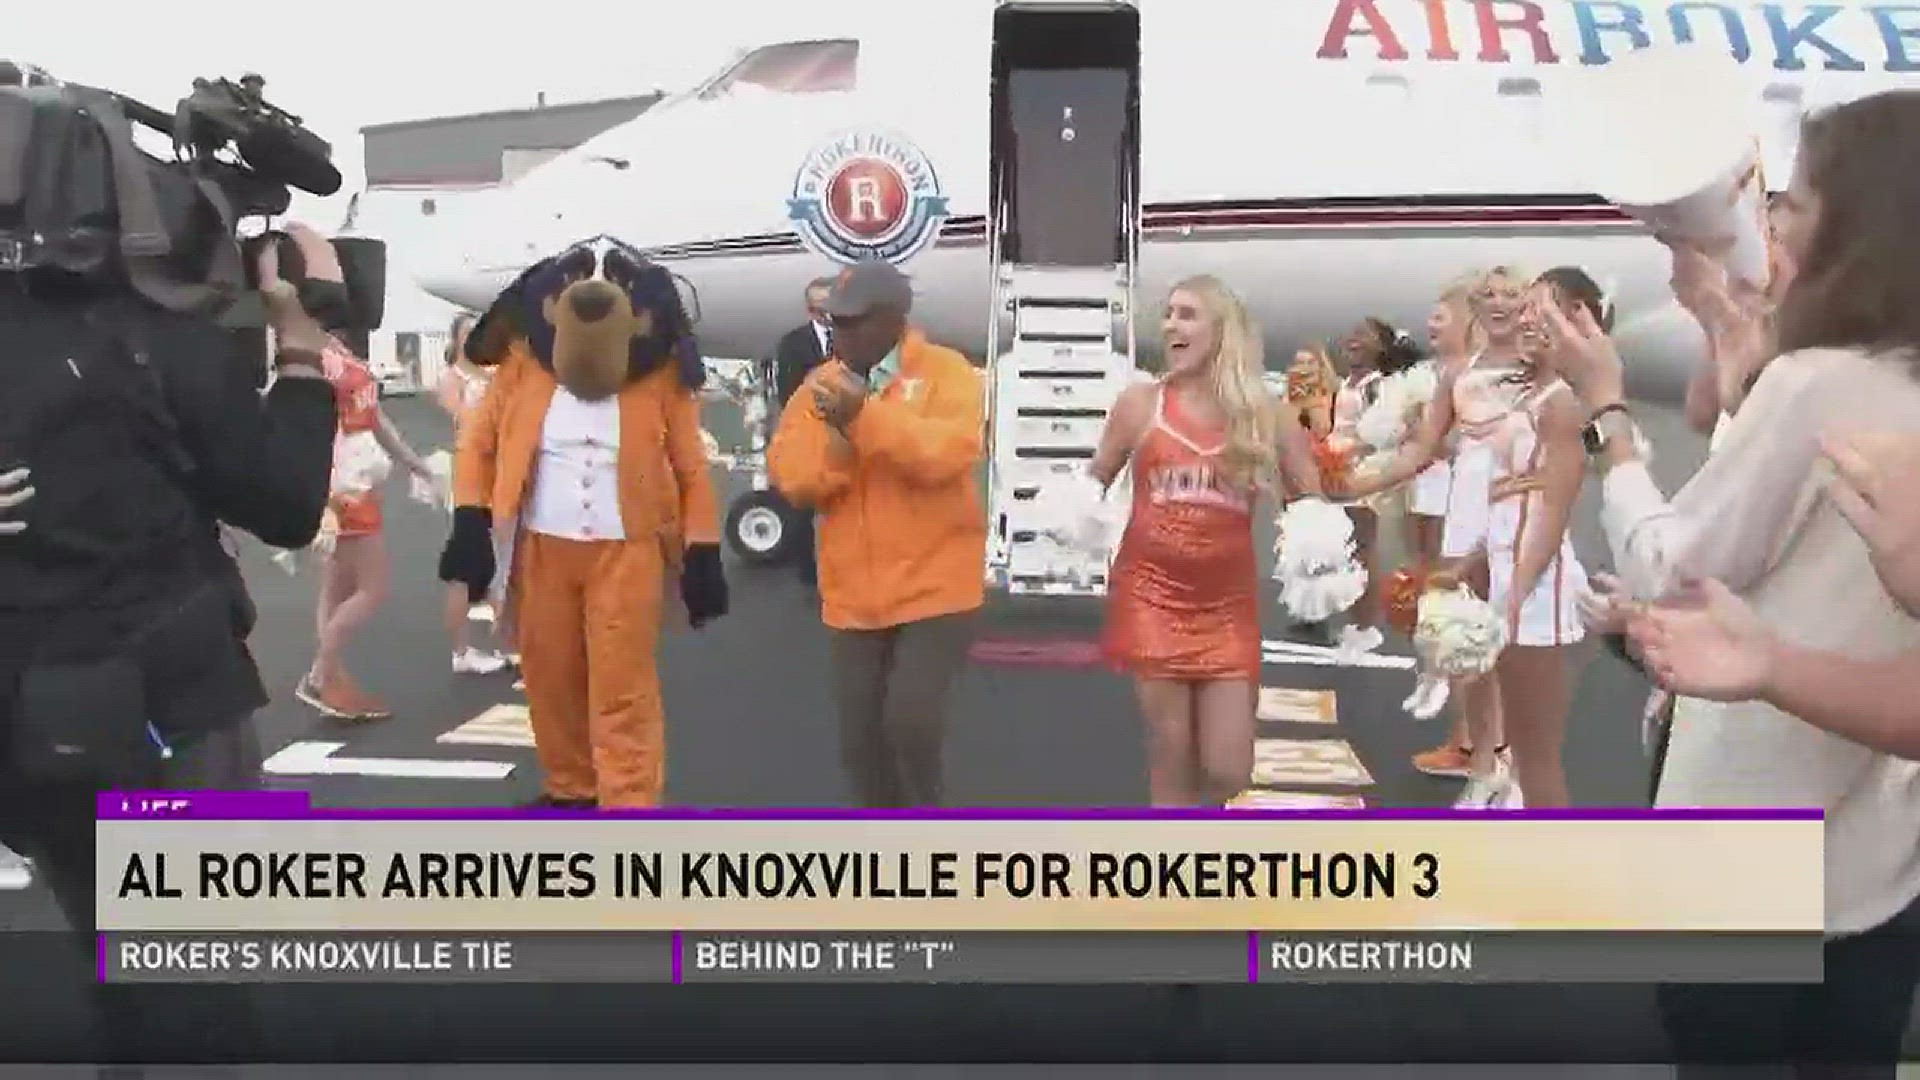 Rokerthon 3 comes to the University of Tennessee on Wednesday to attempt a world record.